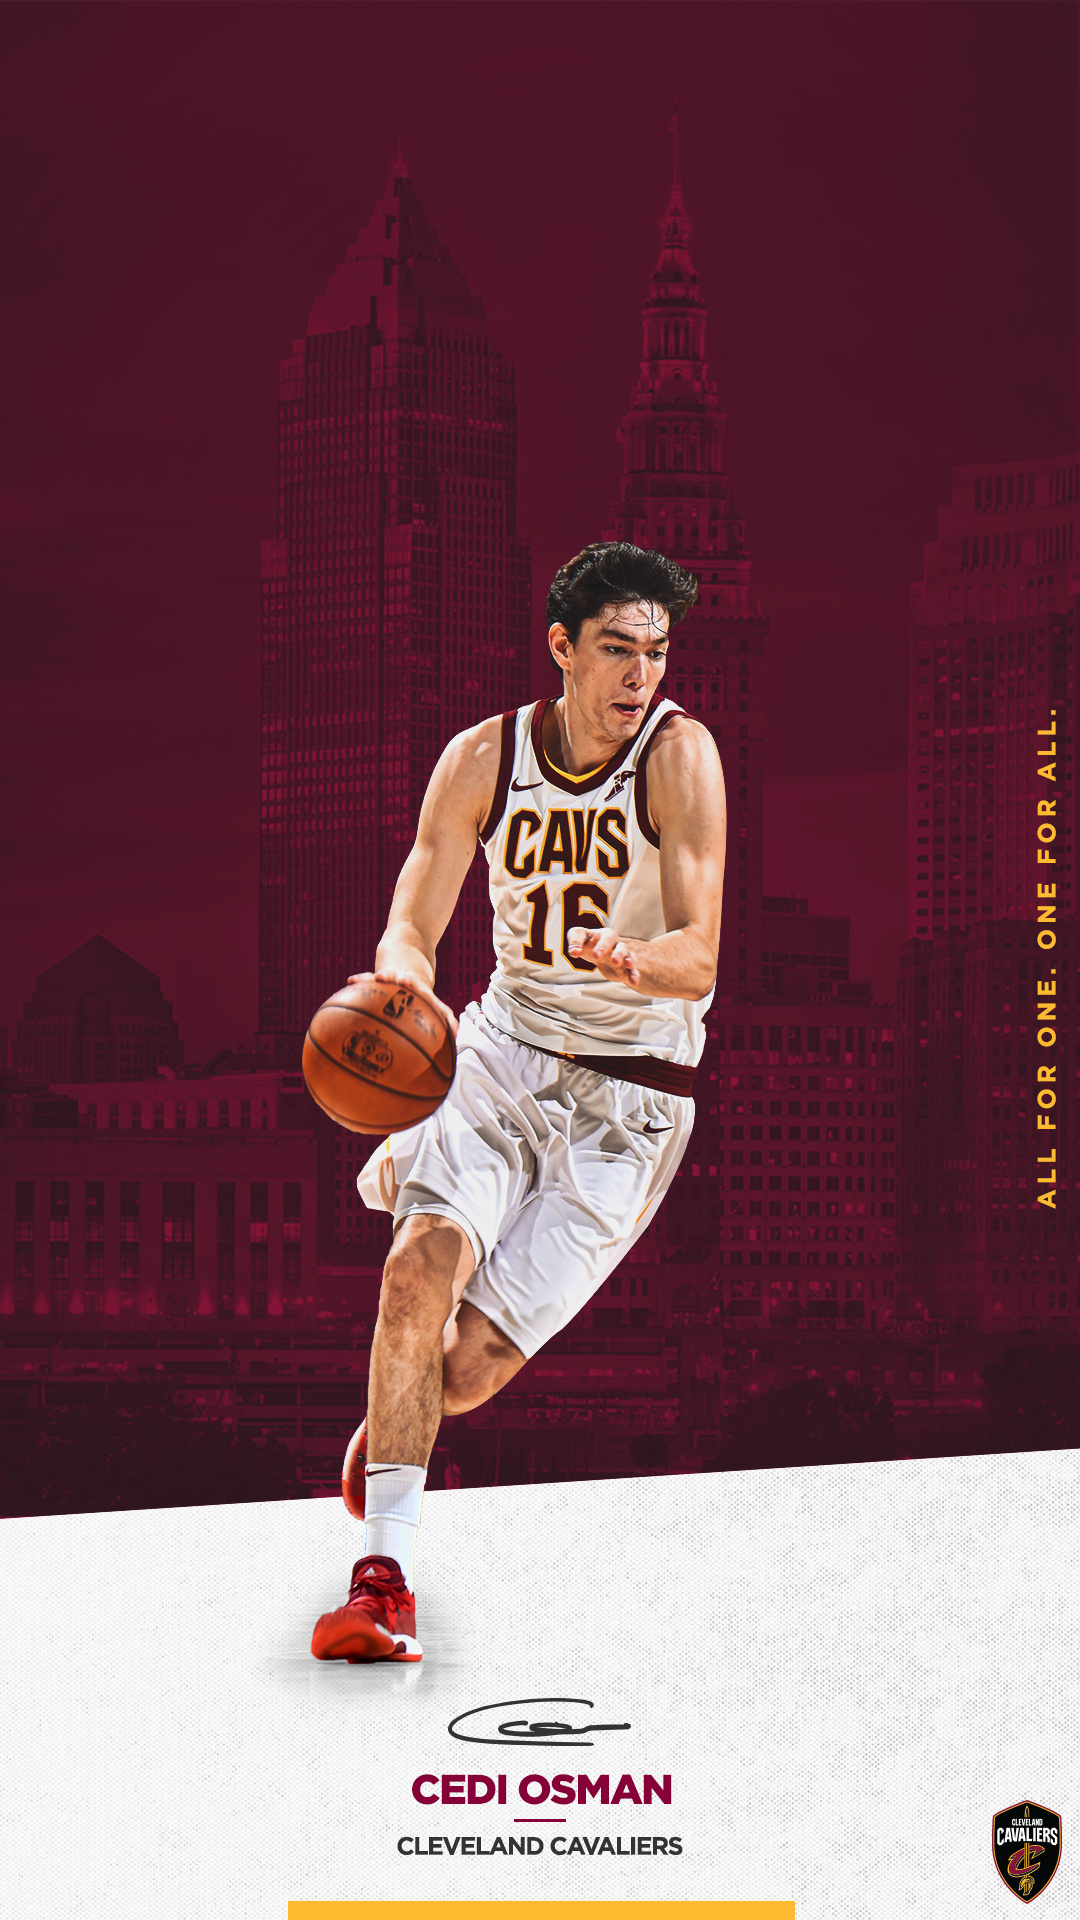 Cleveland Cavaliers: Cedi Osman, The team was sold to businessman Dan Gilbert on January 3, 2005. 1080x1920 Full HD Background.